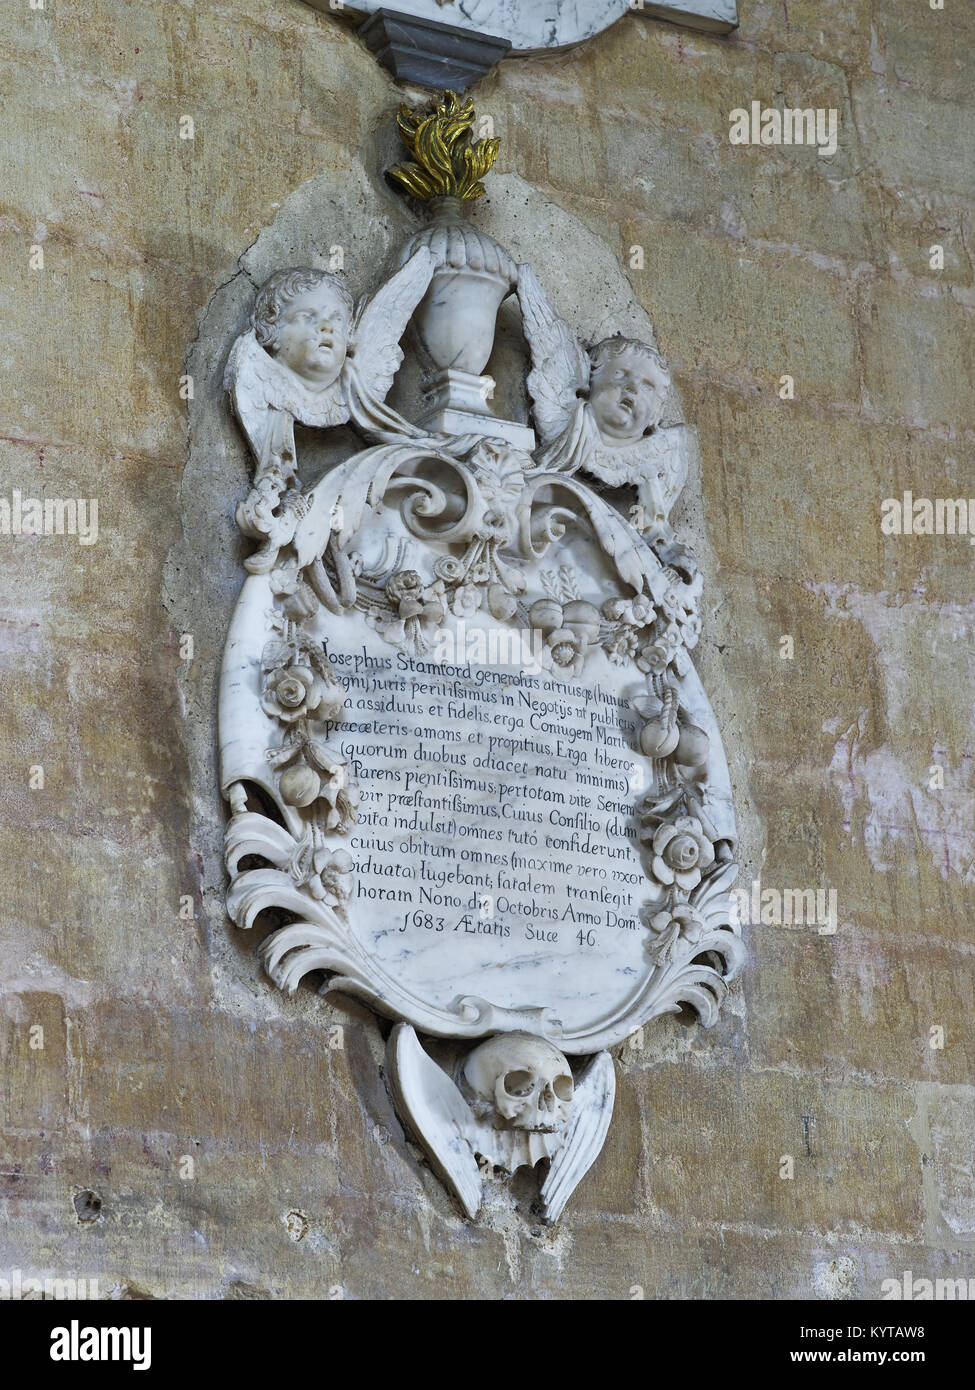 Peterborough Cathedral. Baroque marble wall plaque commemorating Joseph Stamford, dated 1683. Shows two cherubs supporing a flaming urn, with garlands Stock Photo